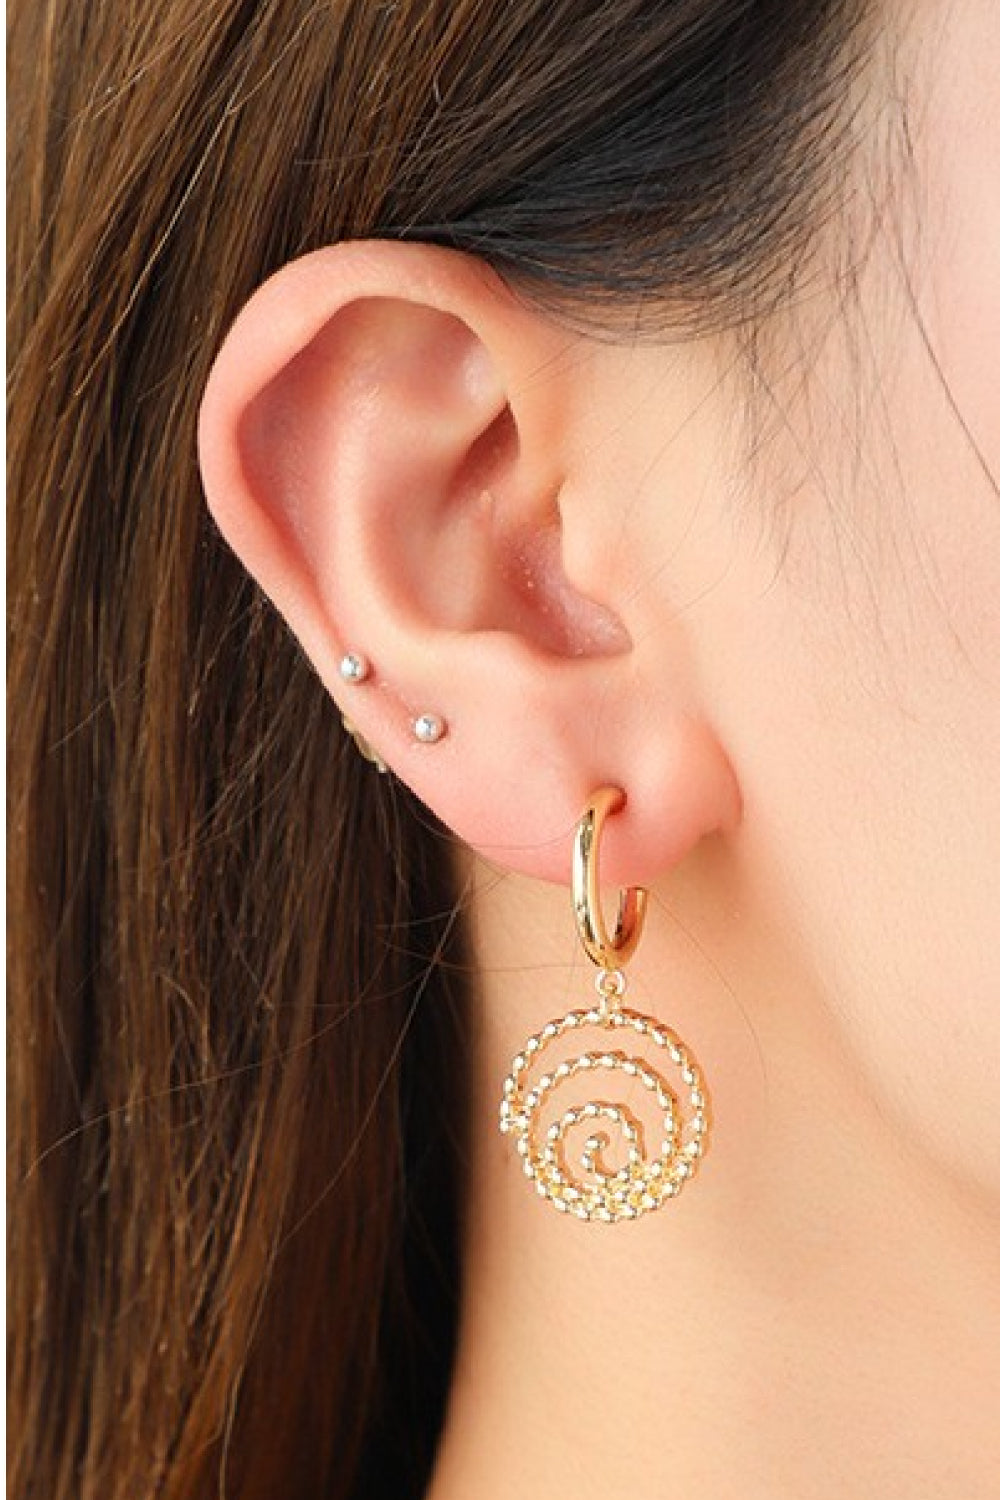 Black 18K Gold-Plated Alloy Spiral Earrings Sentient Beauty Fashions